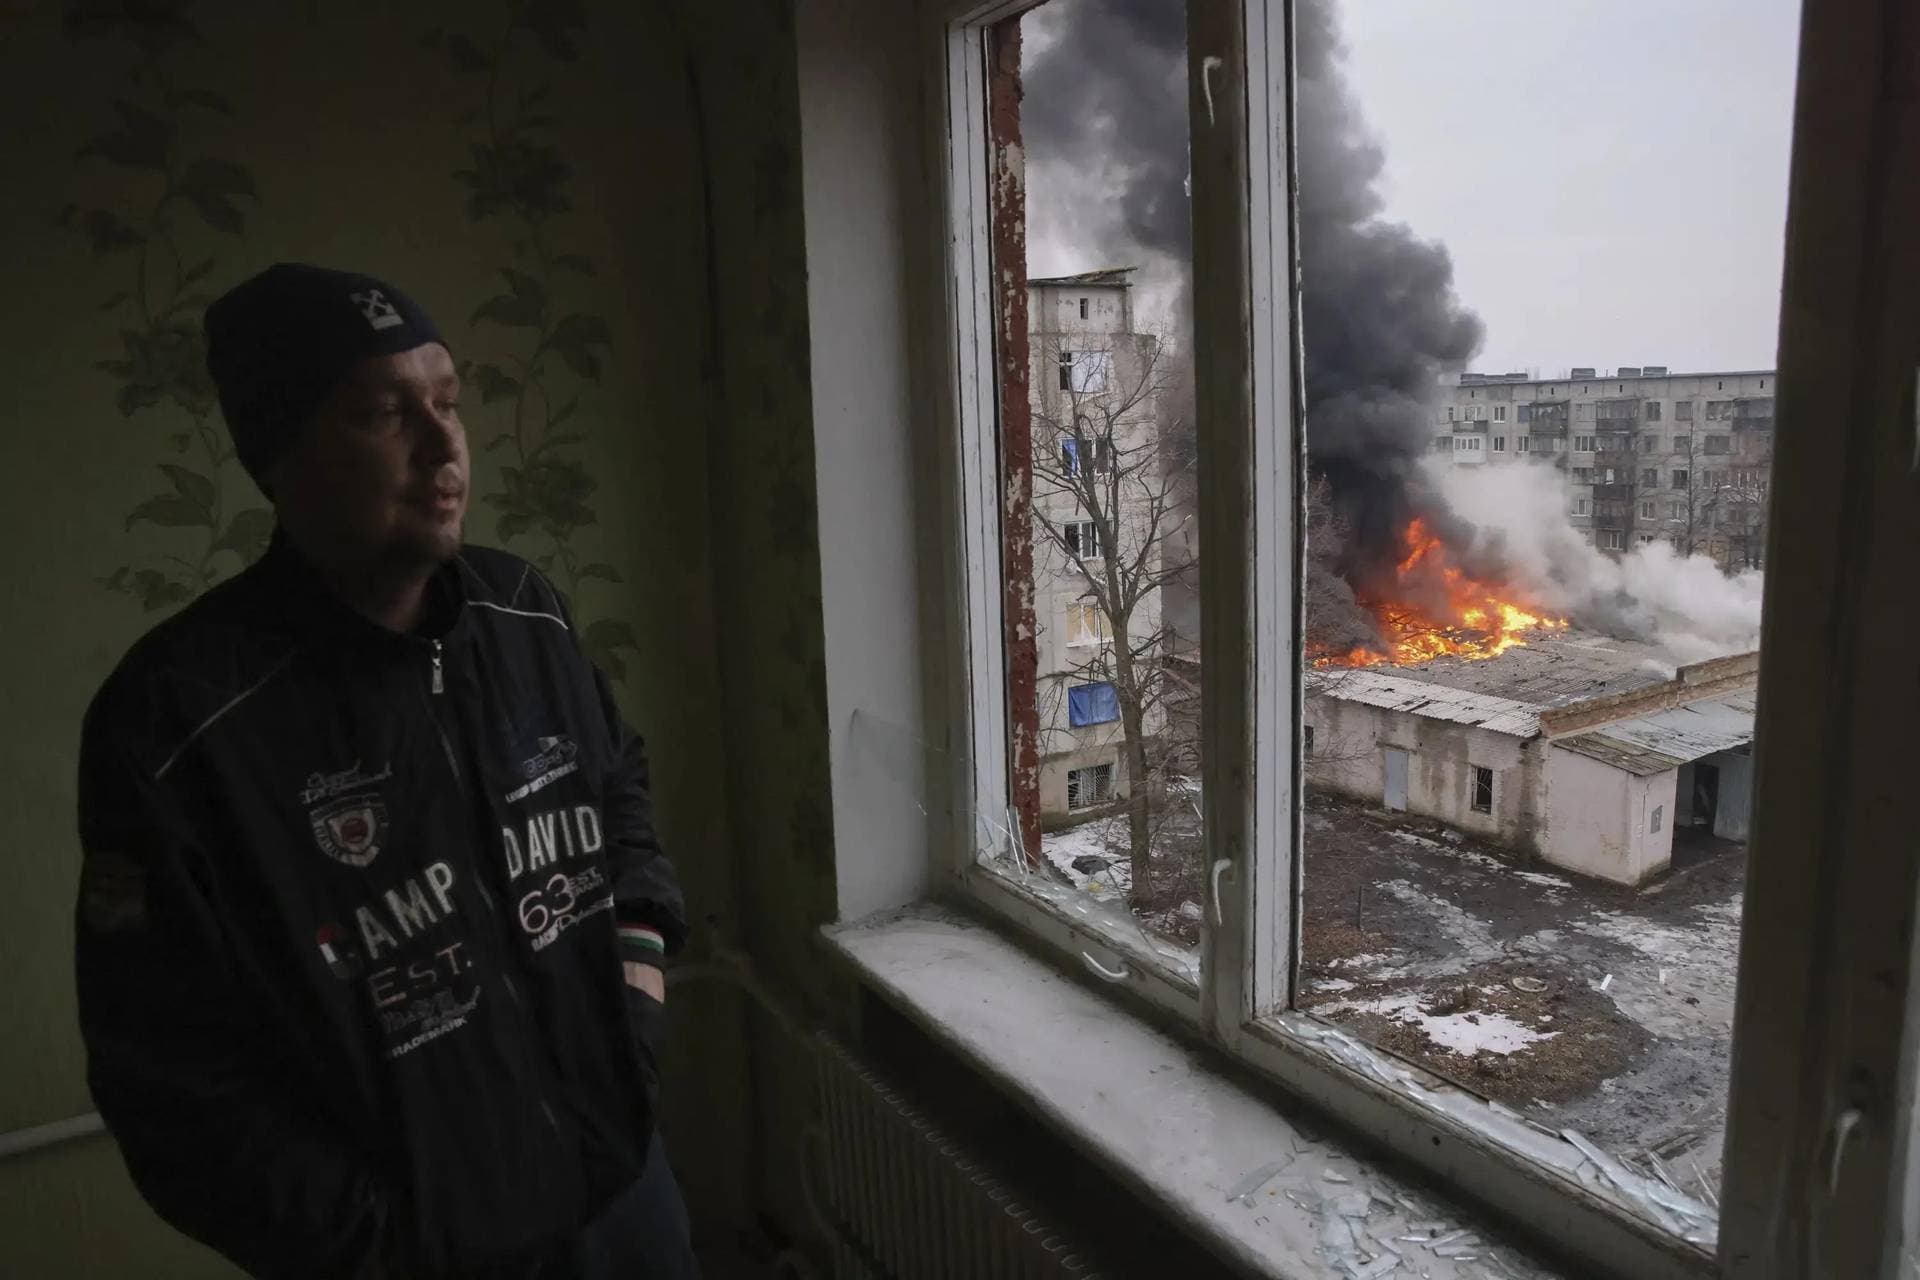 A local resident stands at the window as smoke raises from the burning building after the Russian shelling in the town of Chasiv Yar